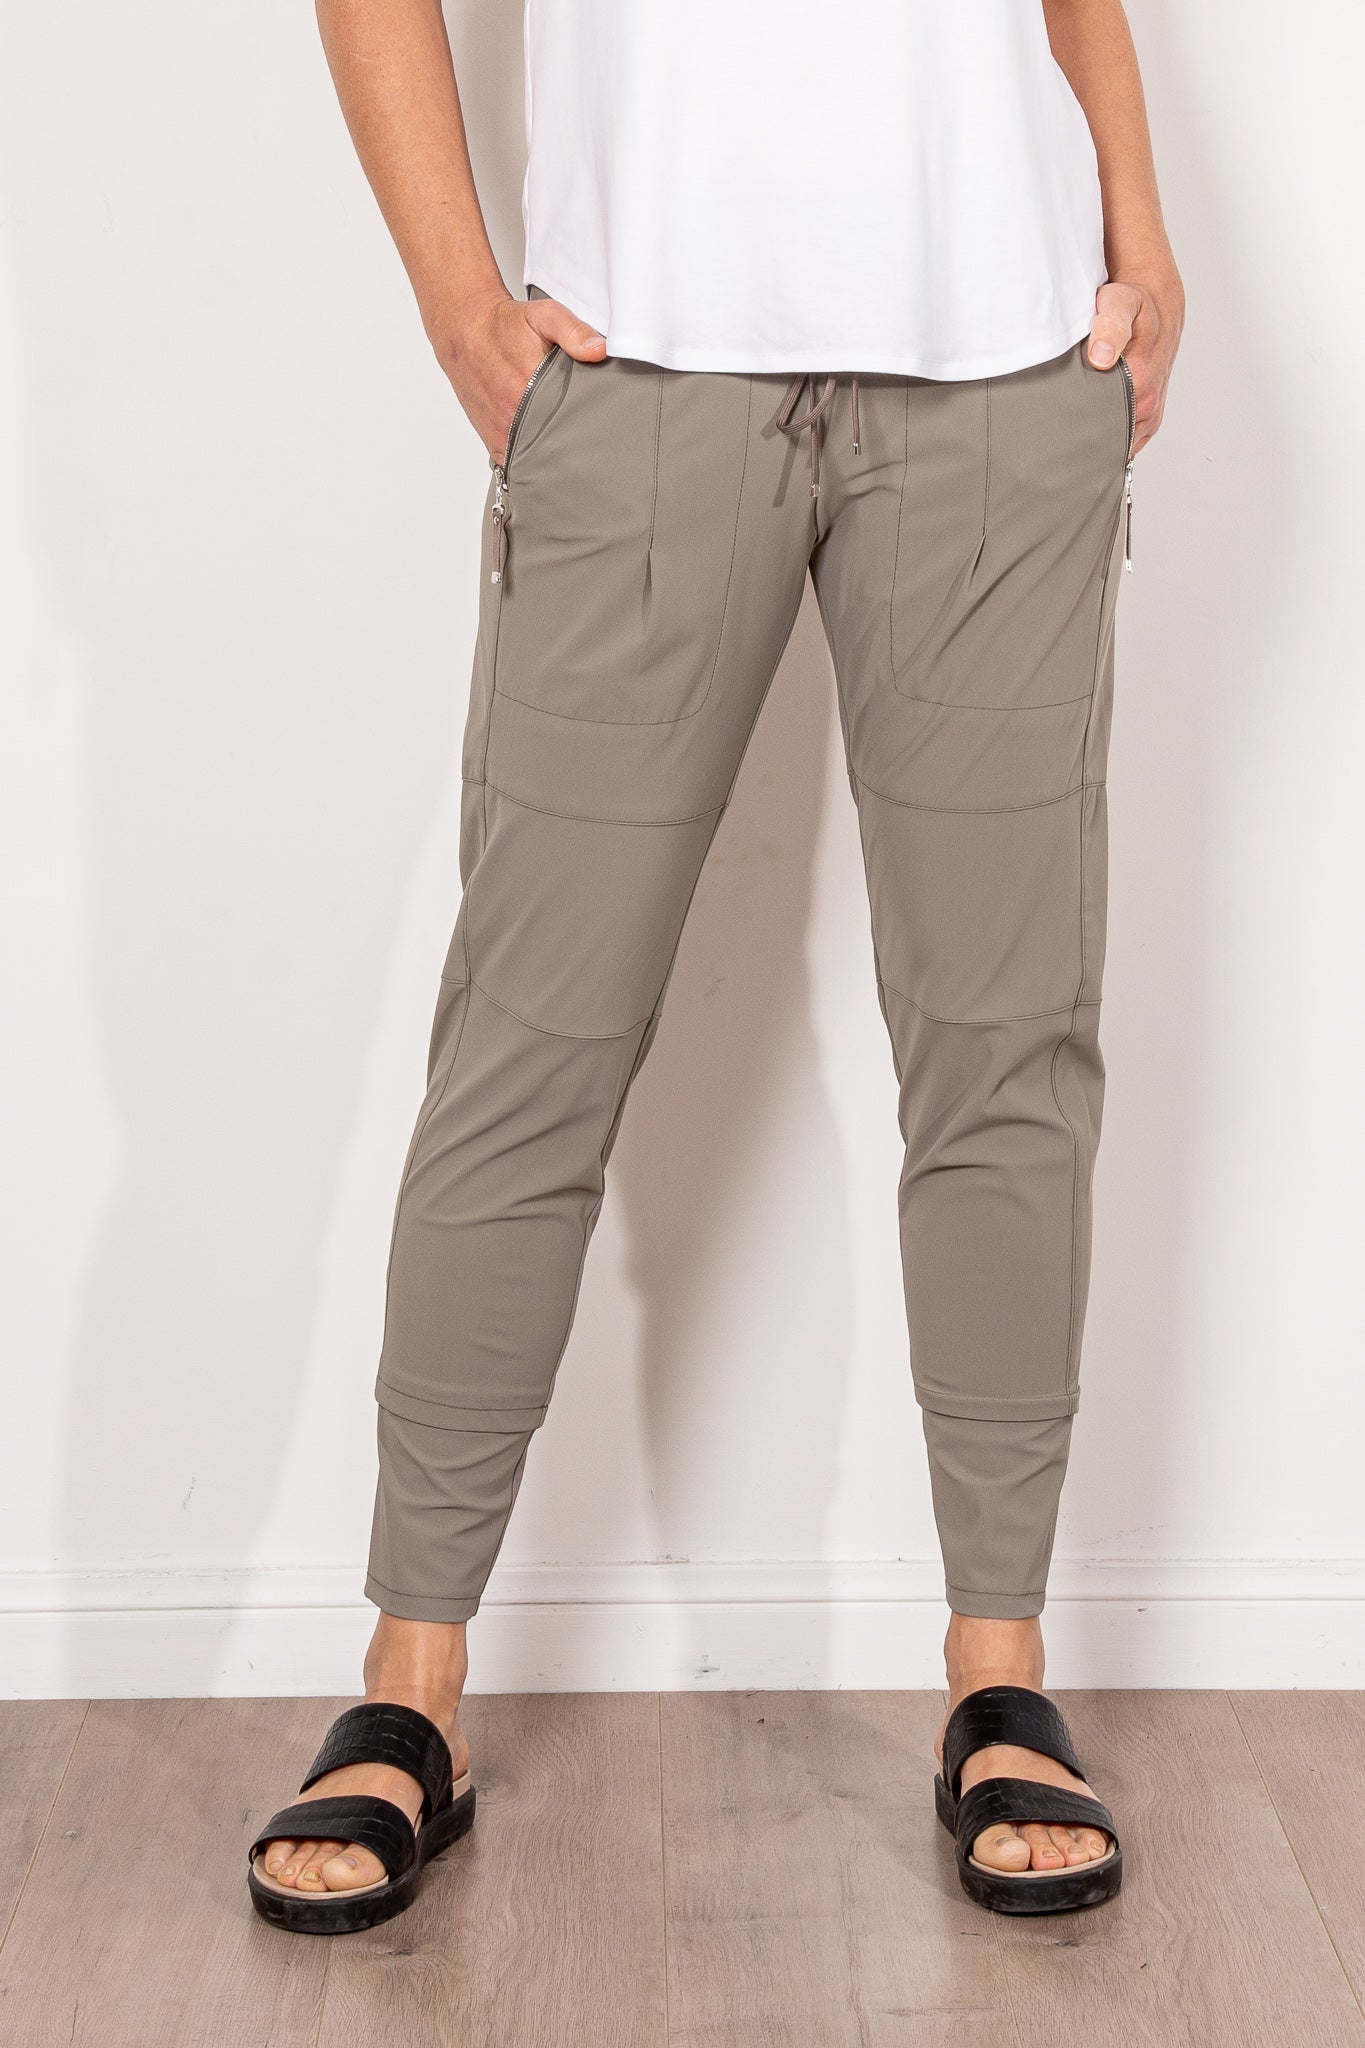 Raffaello Rossi Summer Limited Edition Candy Jogger Pant